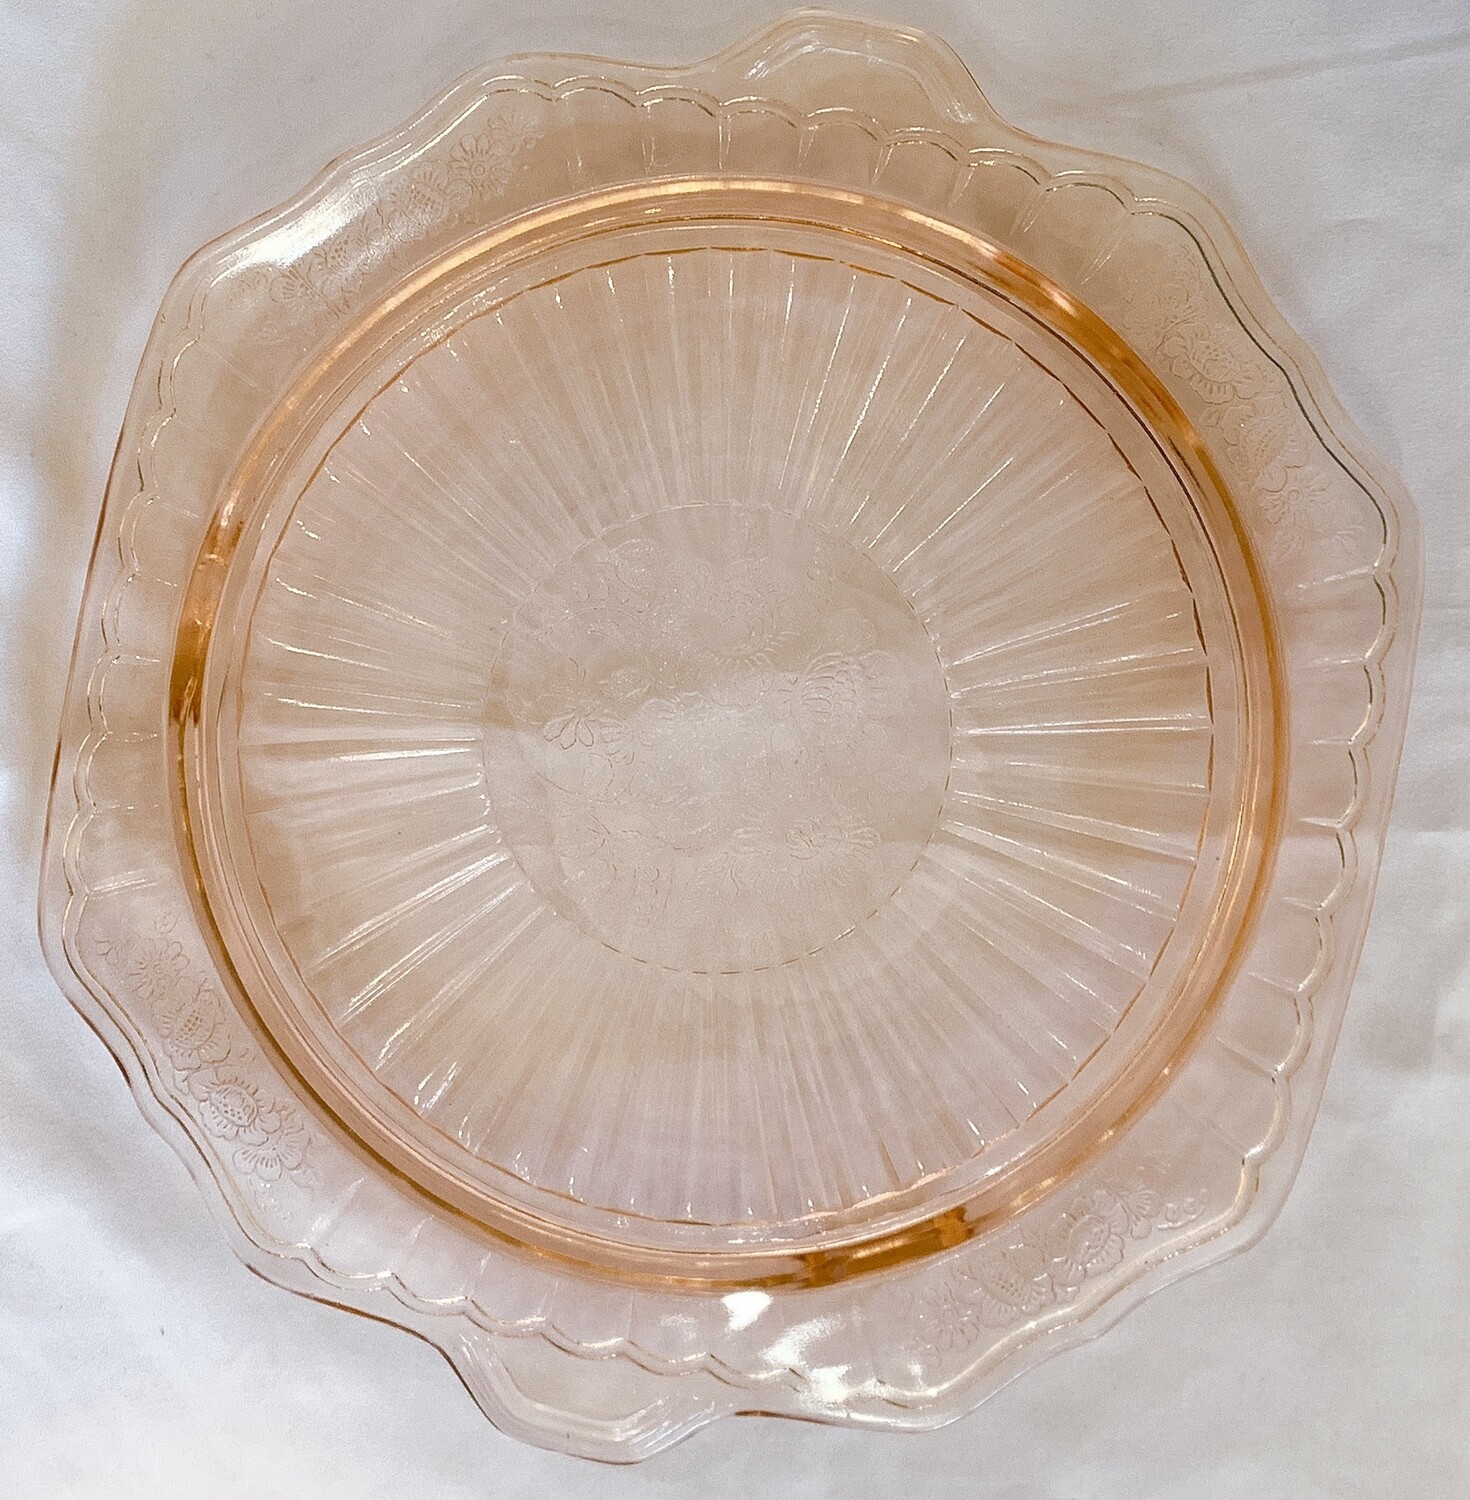 Anchor Hocking Pink Depression Glass Mayfair (open rose) Cake Plate (1930's) 10" (flaw)